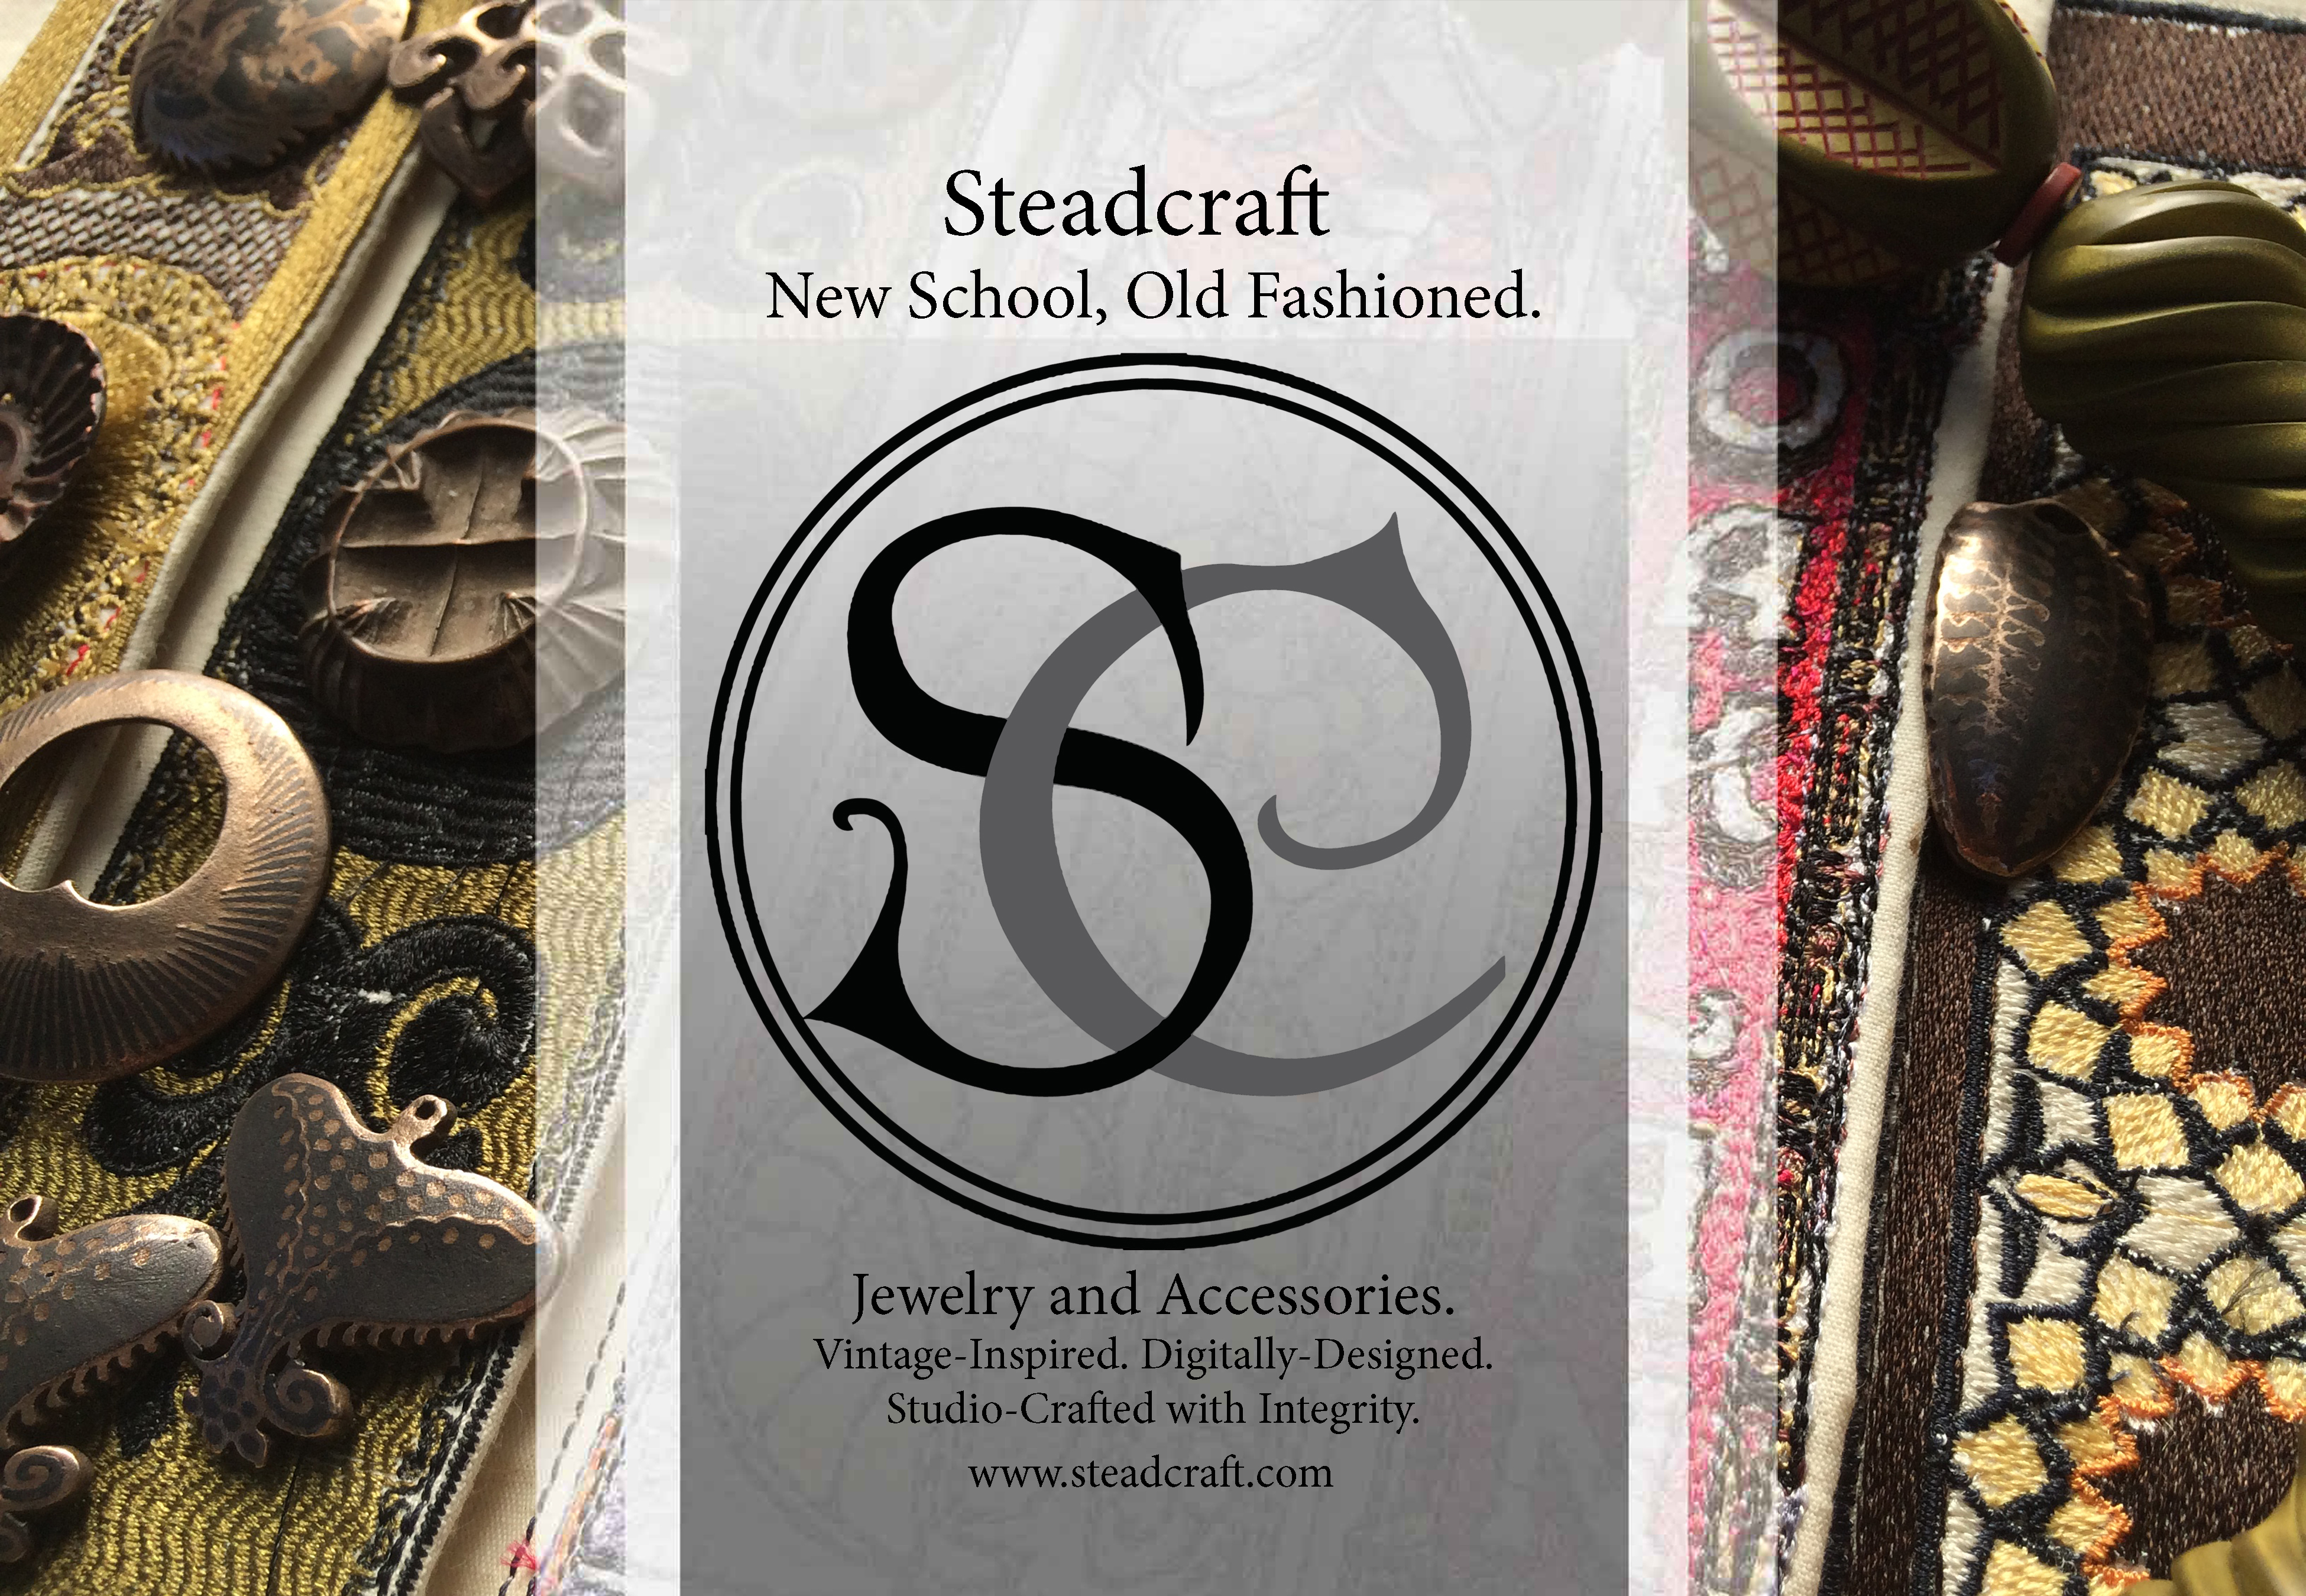 Steadcraft: Timely Fashion. Prototyped with 3D Printing.